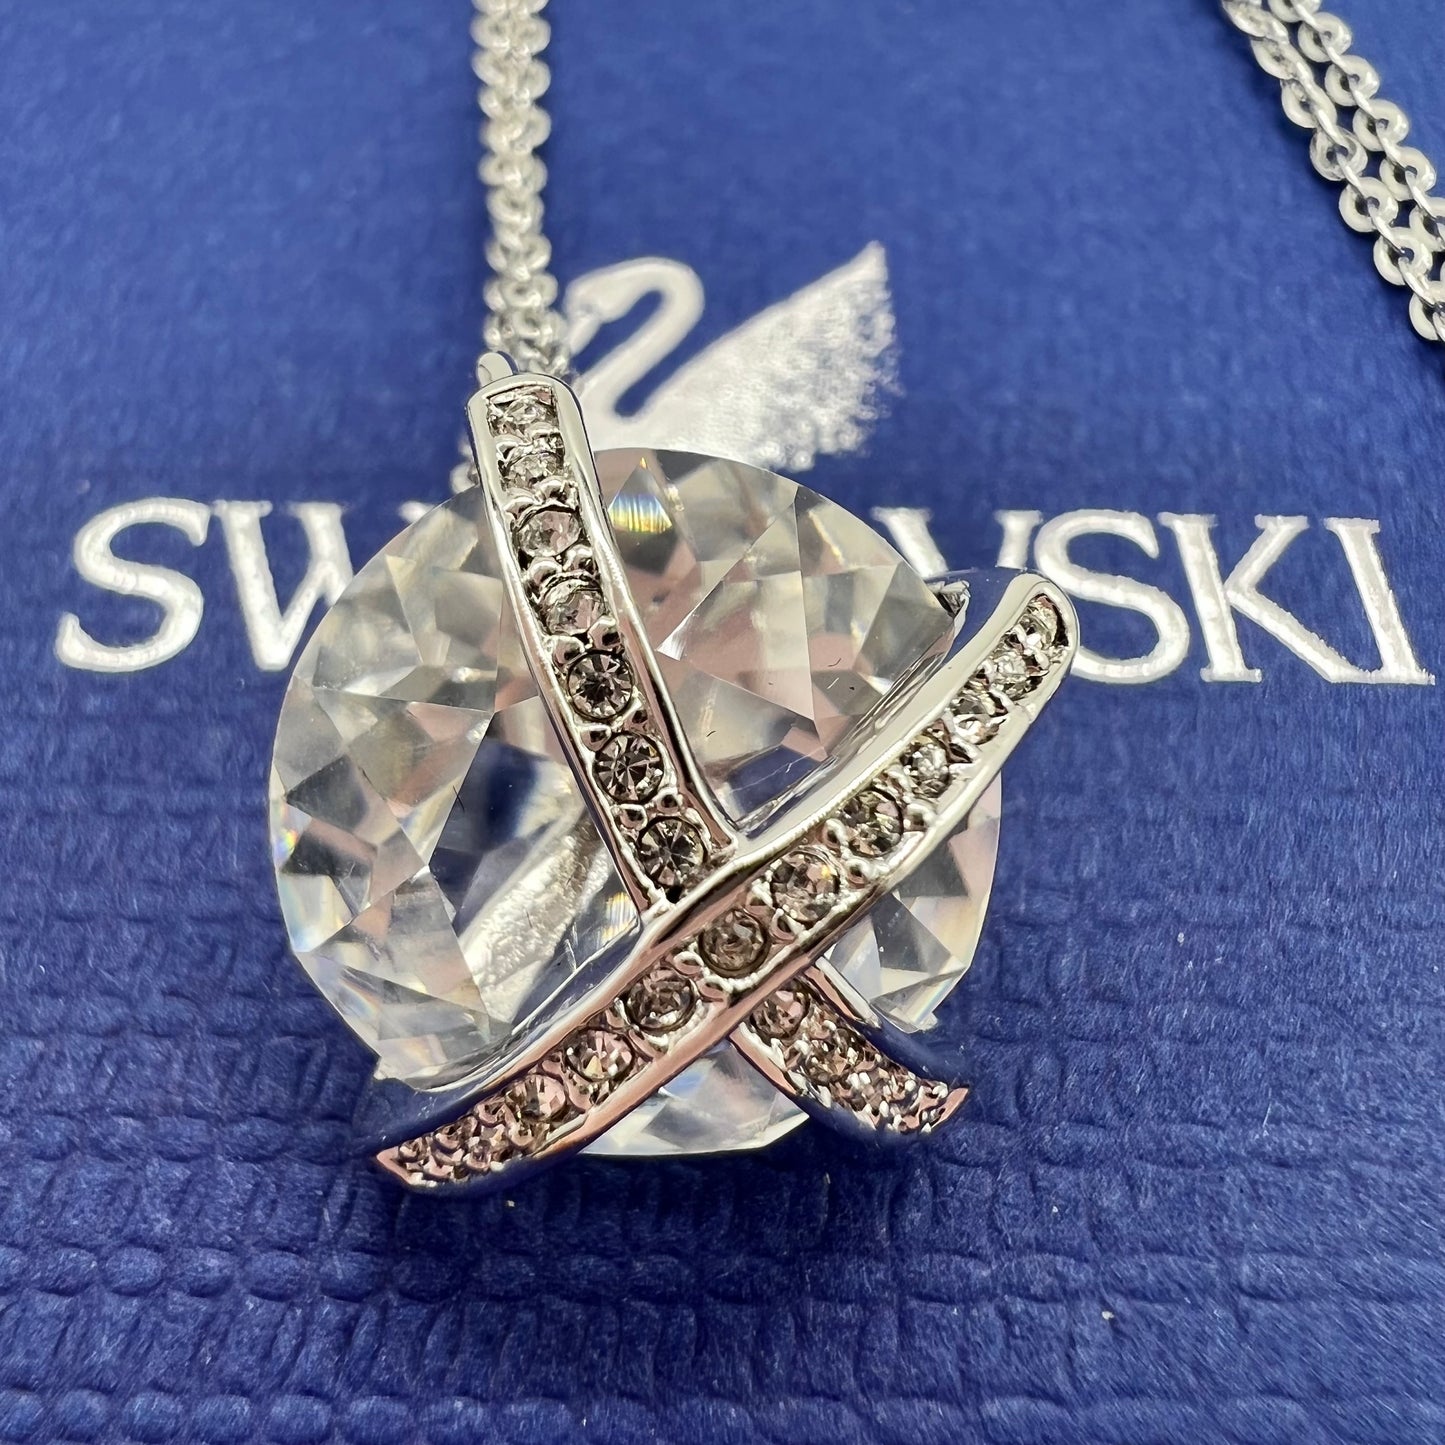 Signed Swarovski Caged Solitaire Crystal Pendant in Original Box and Packaging